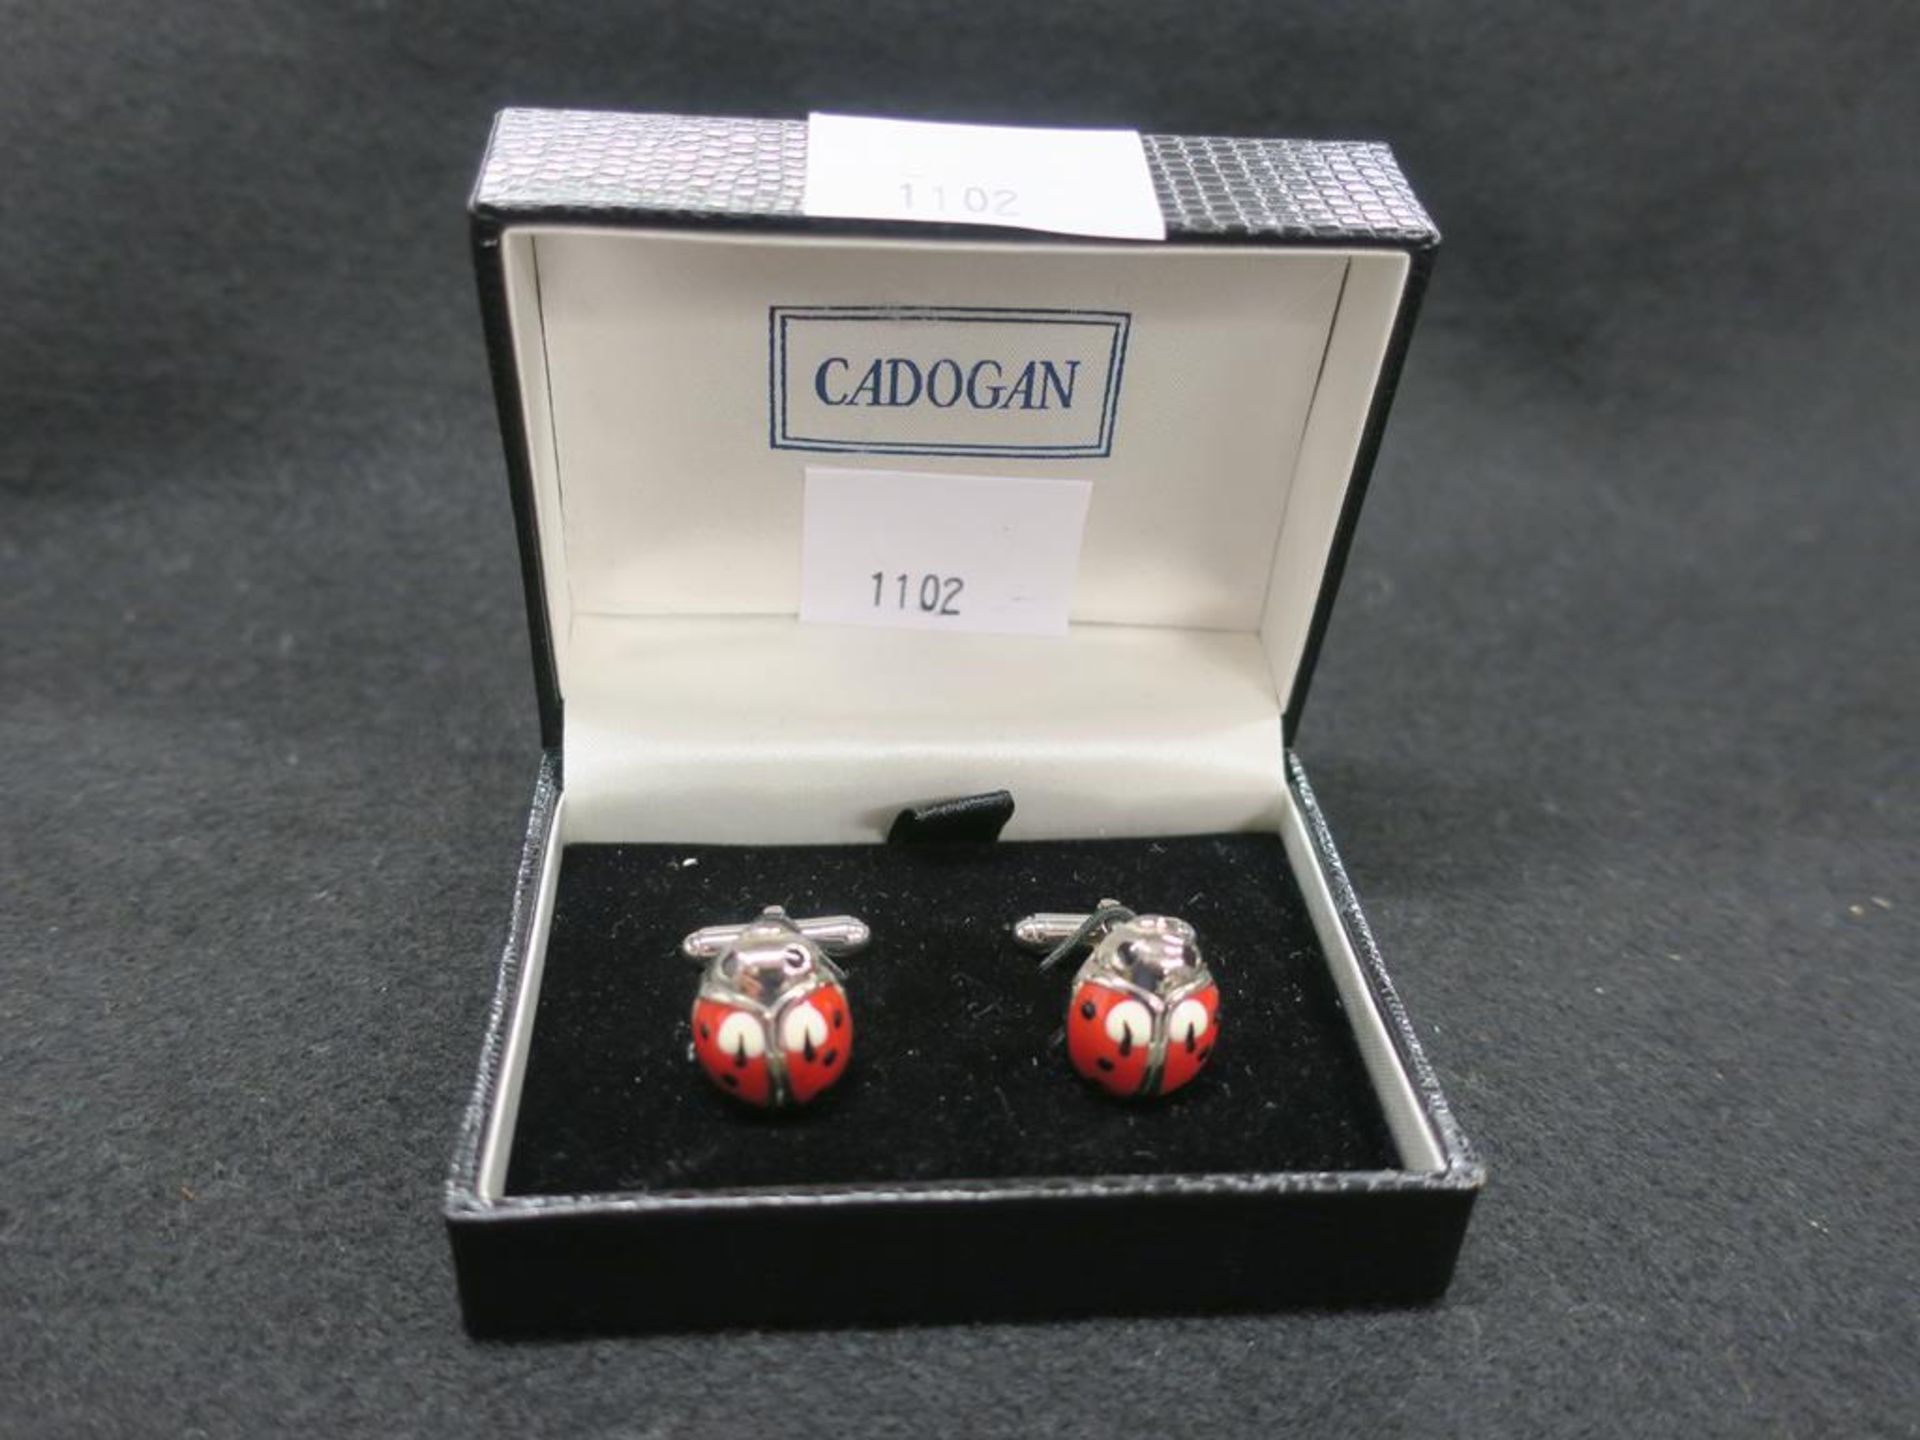 * Pair of Sterling Silver Cuff Links in a Ladybird Design by Cadogan (RRP £335)